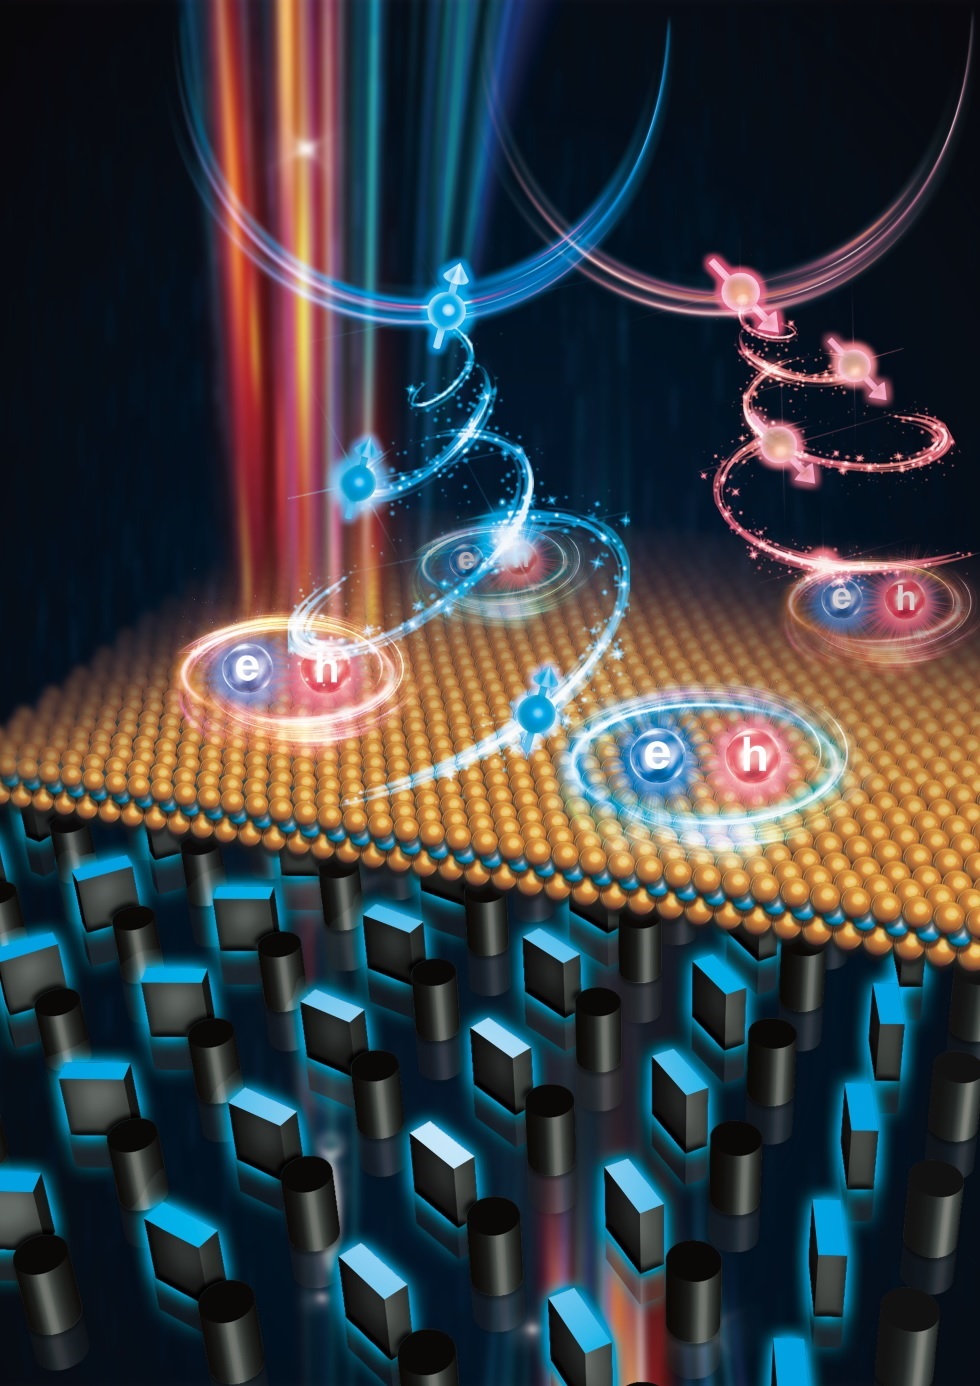 The incorporation of a WSe2 monolayer into a photonic crystal slab with geometric phase defects enables spin-dependent manipulation of the emission from valley excitons of the WSe2, as well as from randomly placed quantum emitters.